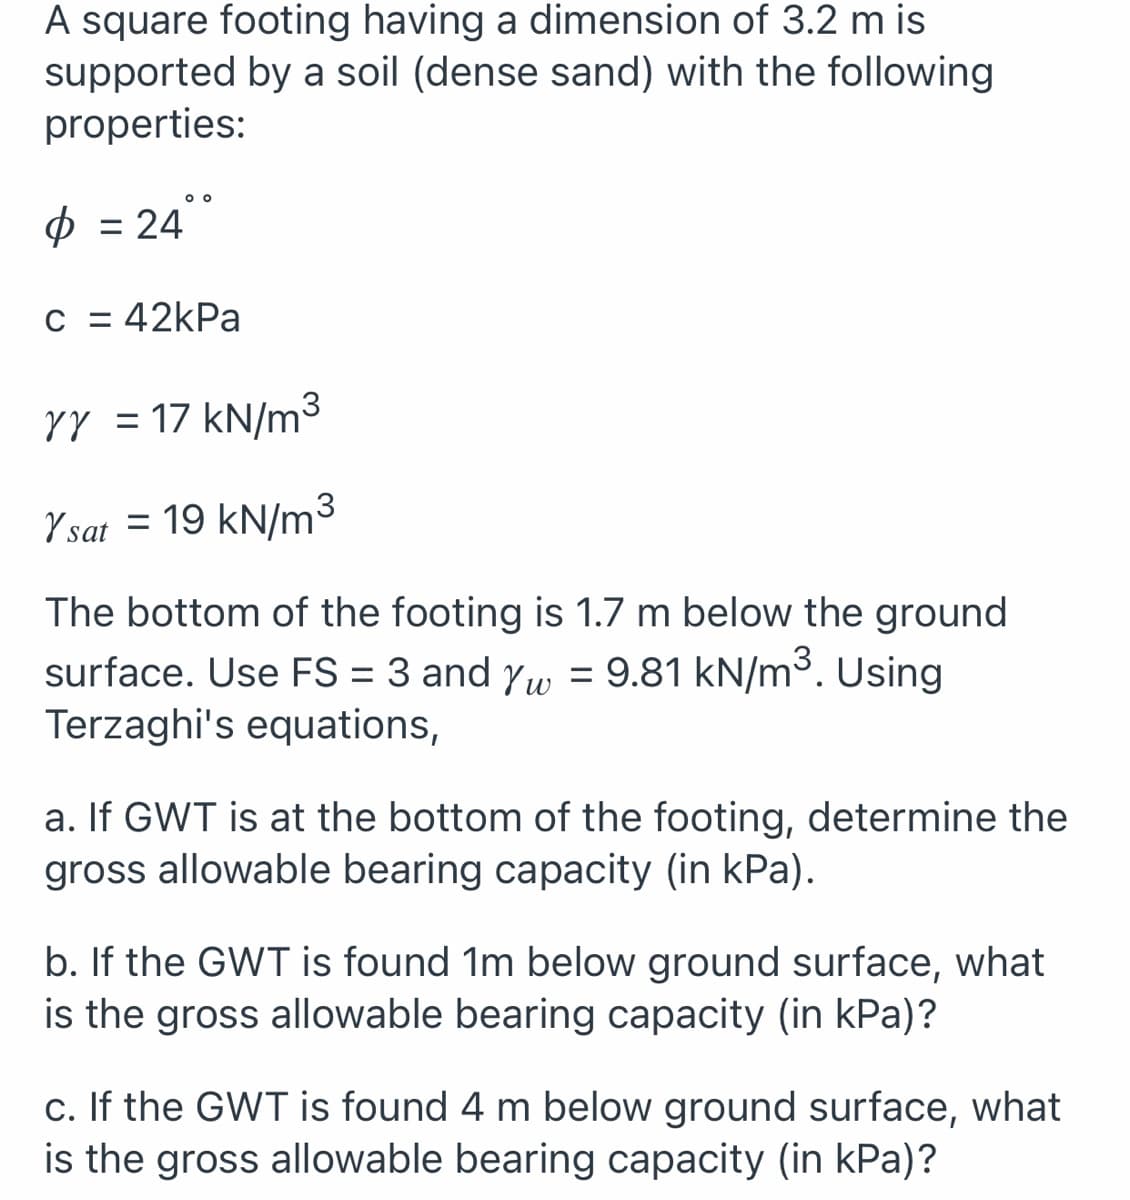 A square footing having a dimension of 3.2 m is
supported by a soil (dense sand) with the following
properties:
o o
p = 24
C = 42kPa
YY = 17 kN/m
Y sat = 19 kN/m³
The bottom of the footing is 1.7 m below the ground
surface. Use FS = 3 and yw = 9.81 kN/m³. Using
Terzaghi's equations,
%3D
a. If GWT is at the bottom of the footing, determine the
gross allowable bearing capacity (in kPa).
b. If the GWT is found 1m below ground surface, what
is the gross allowable bearing capacity (in kPa)?
c. If the GWT is found 4 m below ground surface, what
is the gross allowable bearing capacity (in kPa)?
